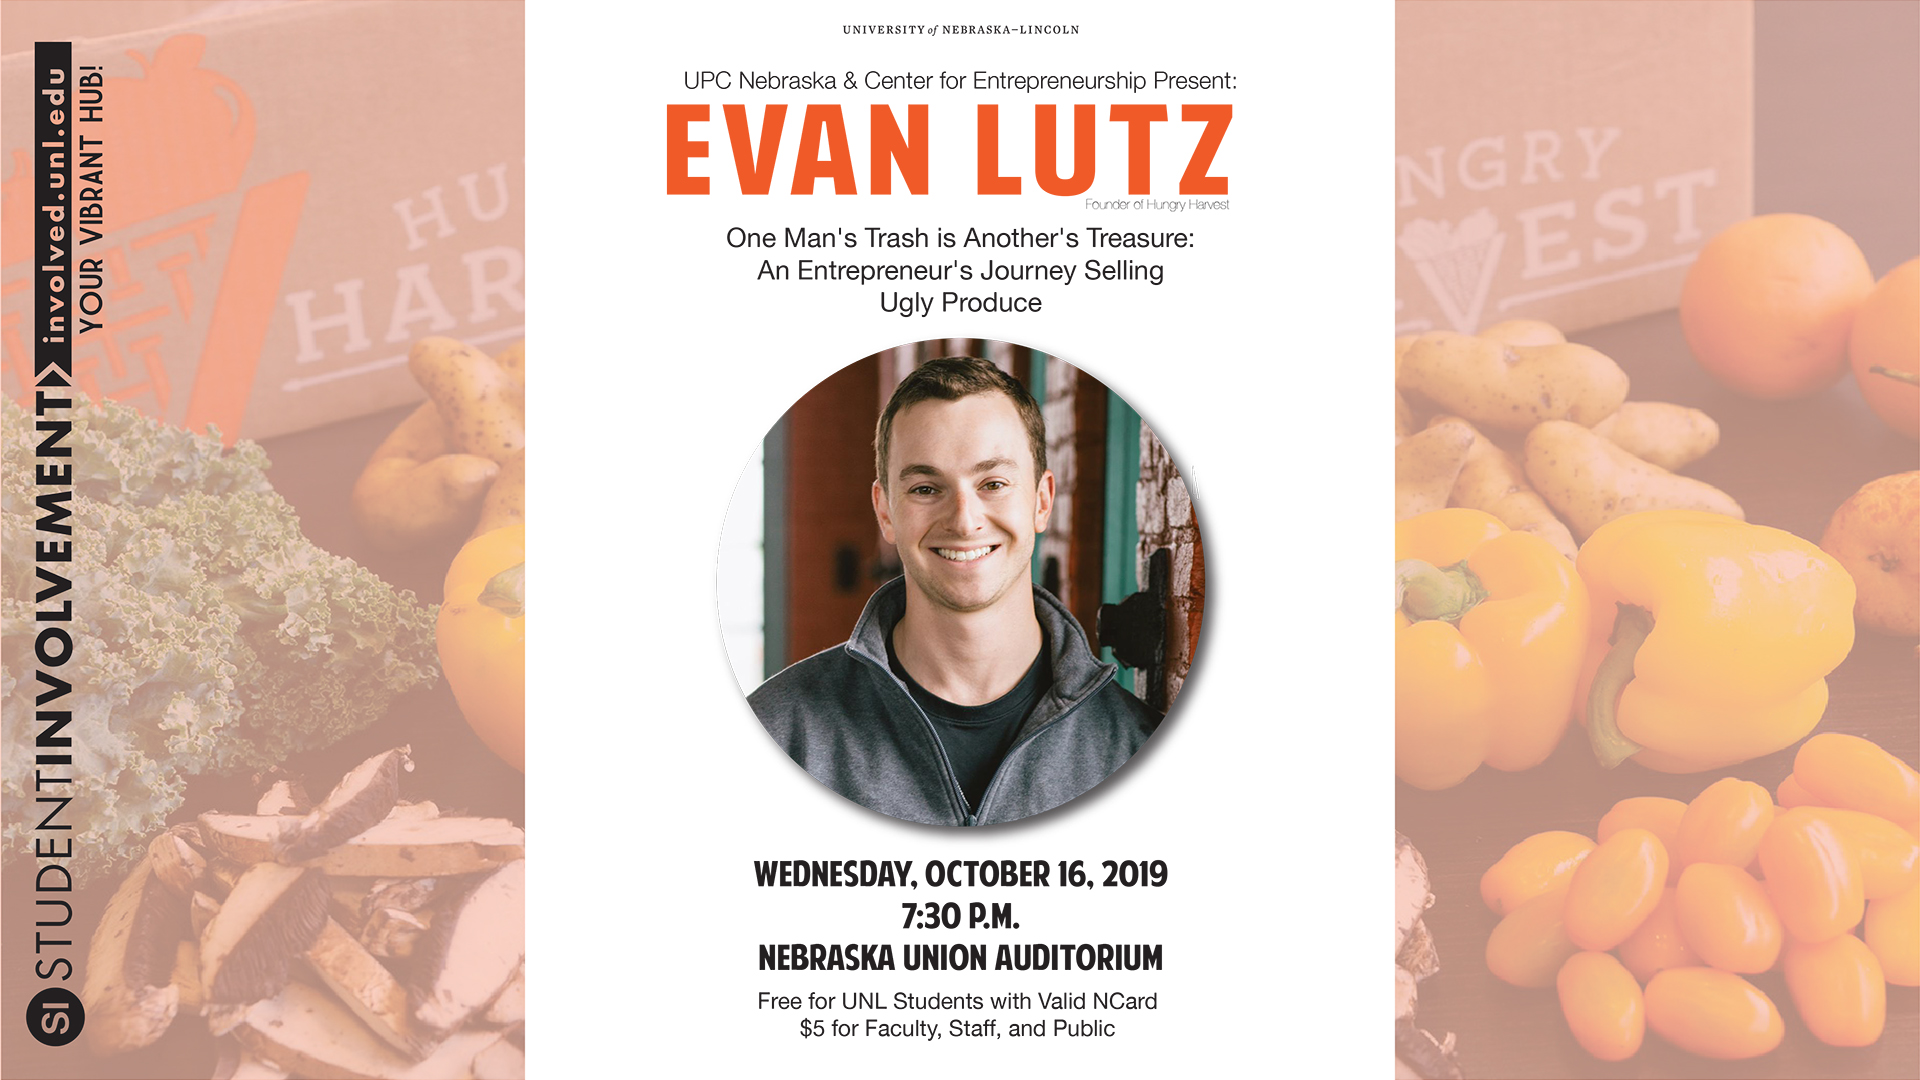 Evan Lutz is a 26-year old social entrepreneur from Baltimore, Maryland, who is passionate about food justice, entrepreneurship and the Baltimore Ravens. 